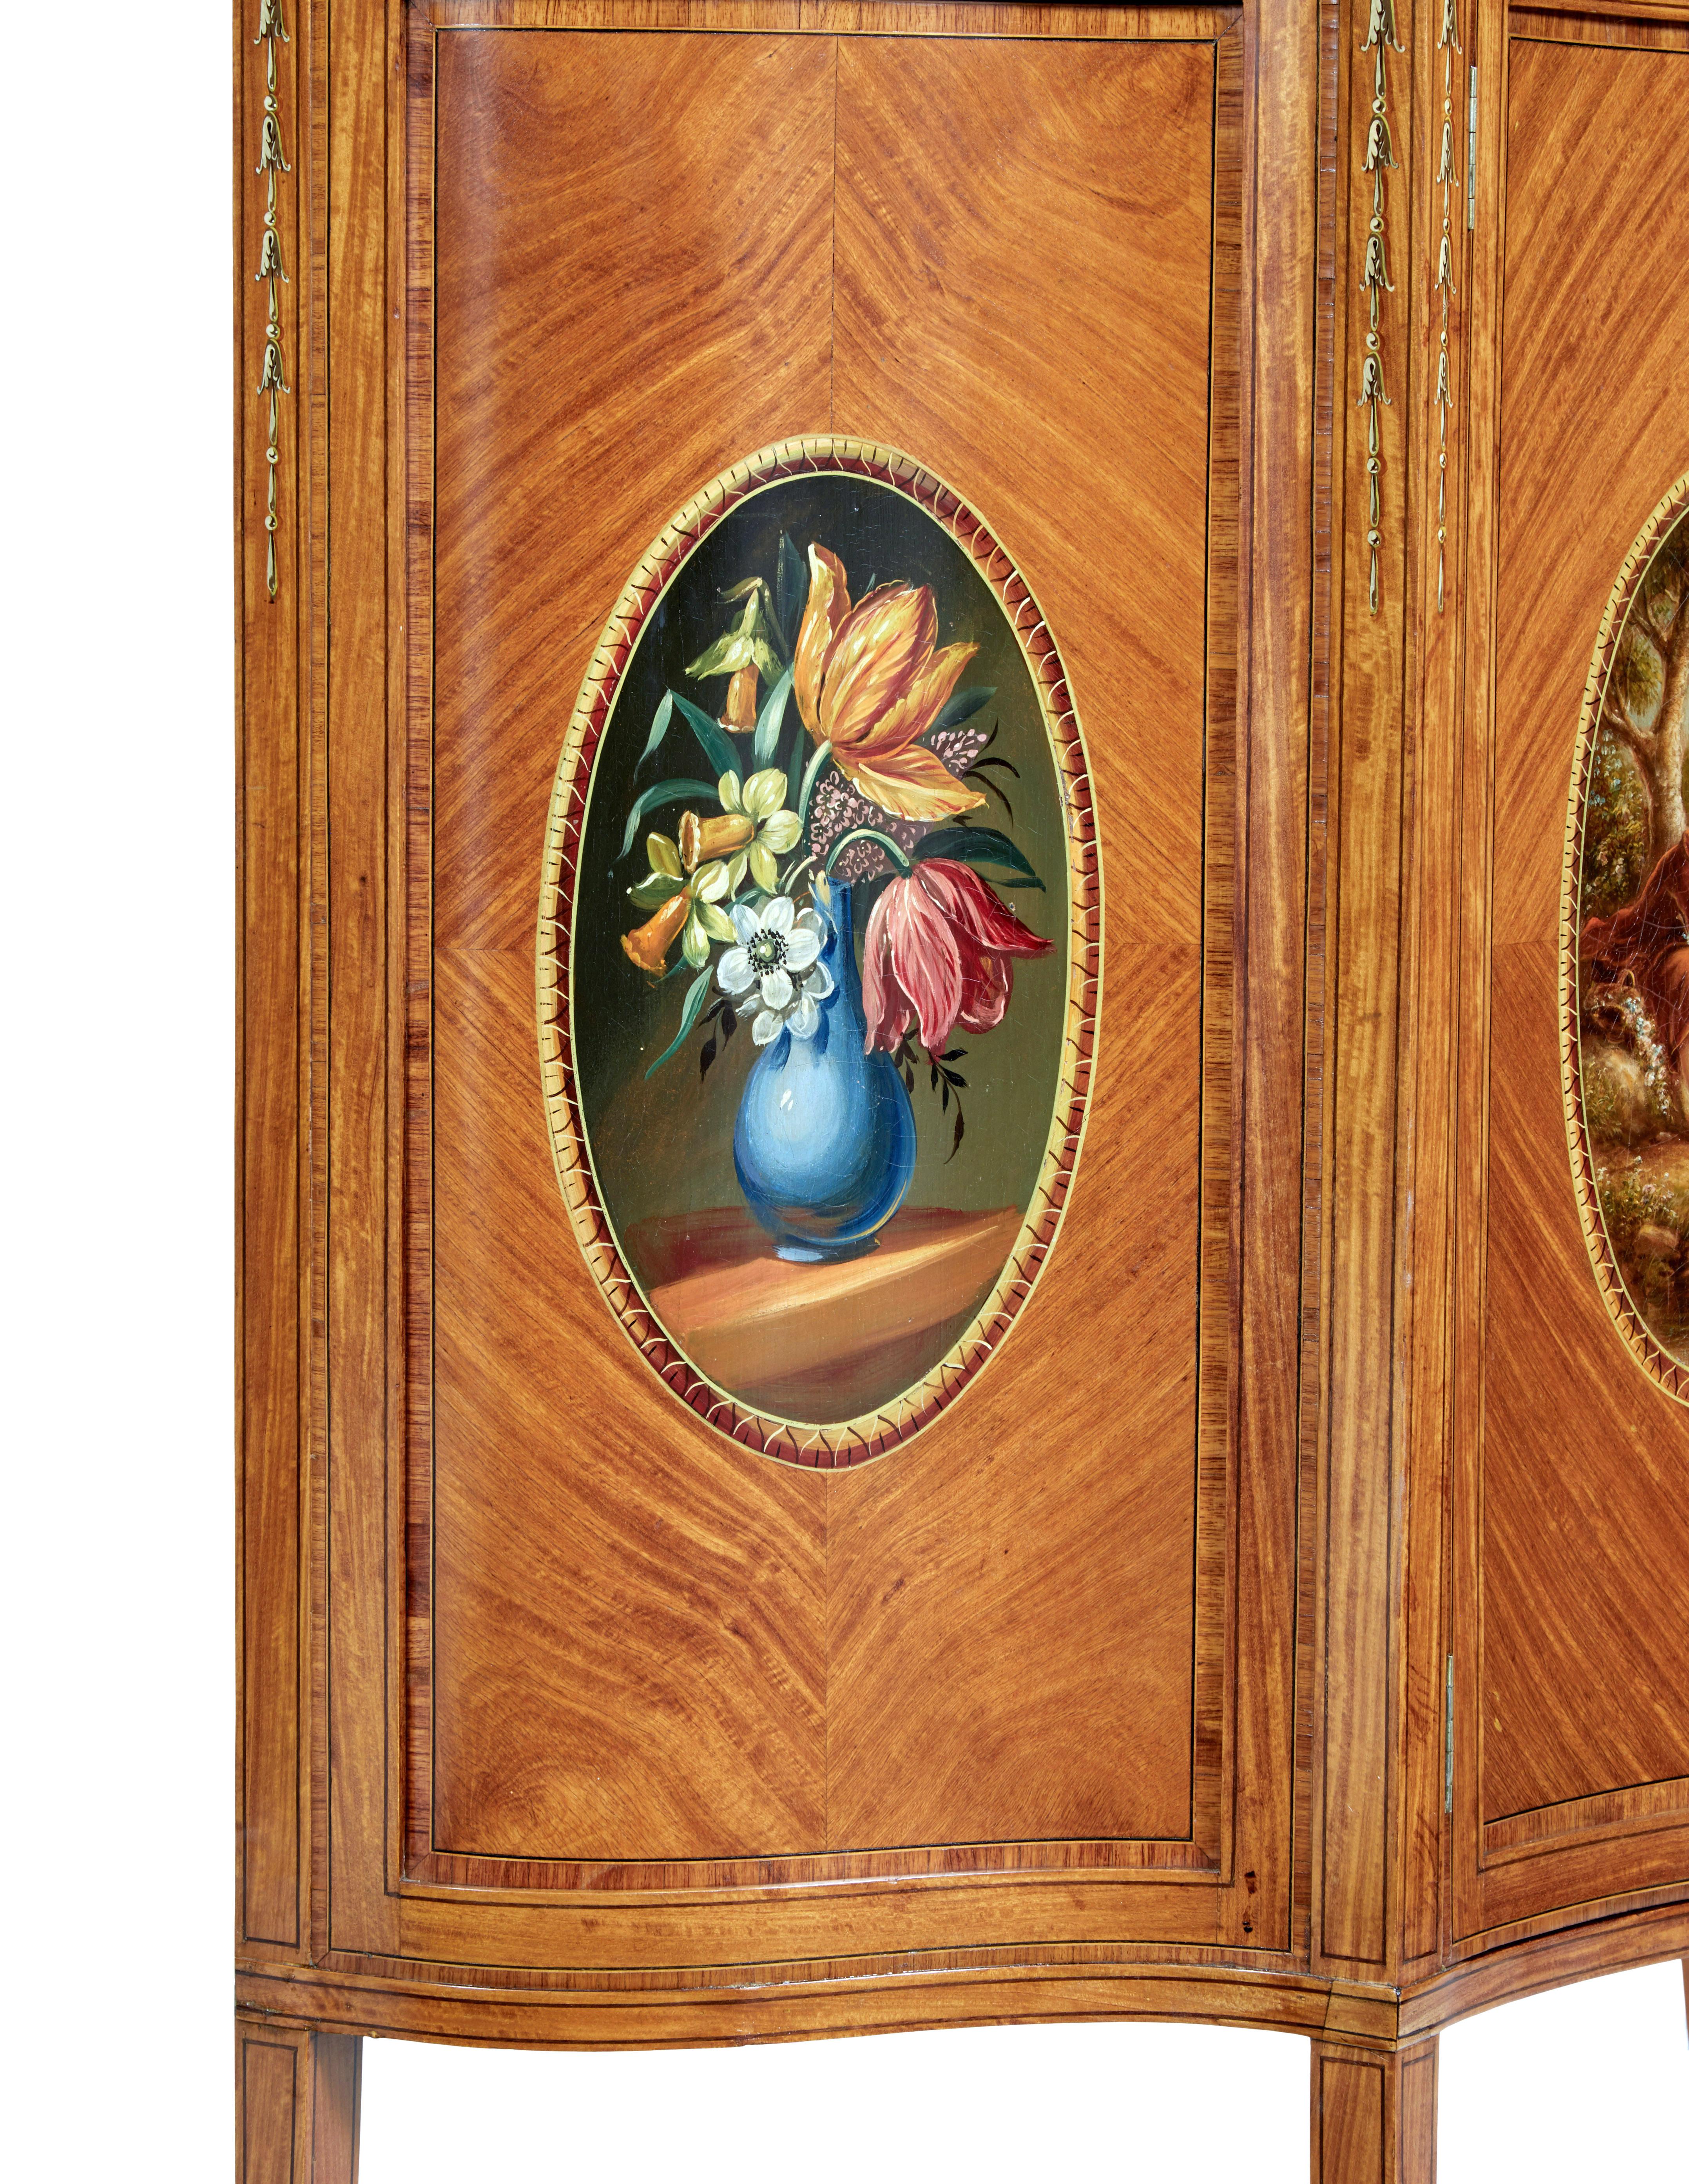 19th century sheraton revival satinwood inlaid and painted cabinet In Good Condition For Sale In Debenham, Suffolk